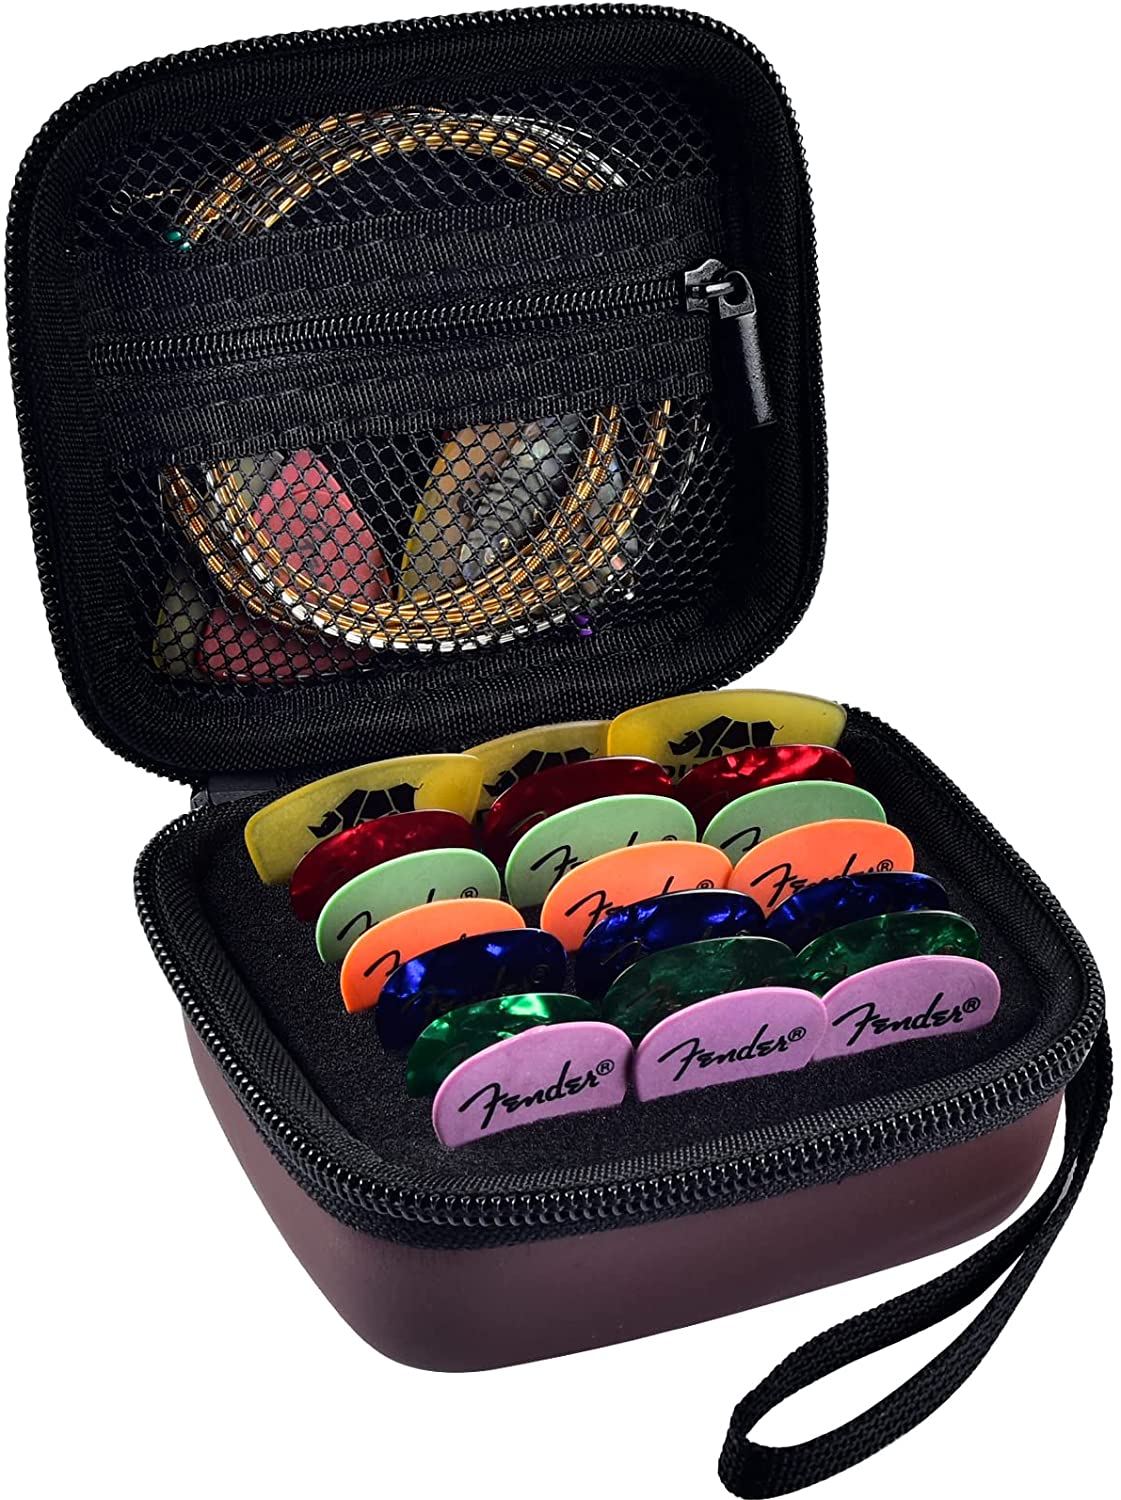 Guitar Pick Holder Case for Fender/ for Dunlop/ for D'Addario/ for Jim Dunlop/ for ChromaCast/ for UNLP MUSICAL INSTRUMENT Guitar Accessories, All Size Picks Storage Pouch Box-Bag Only-balck